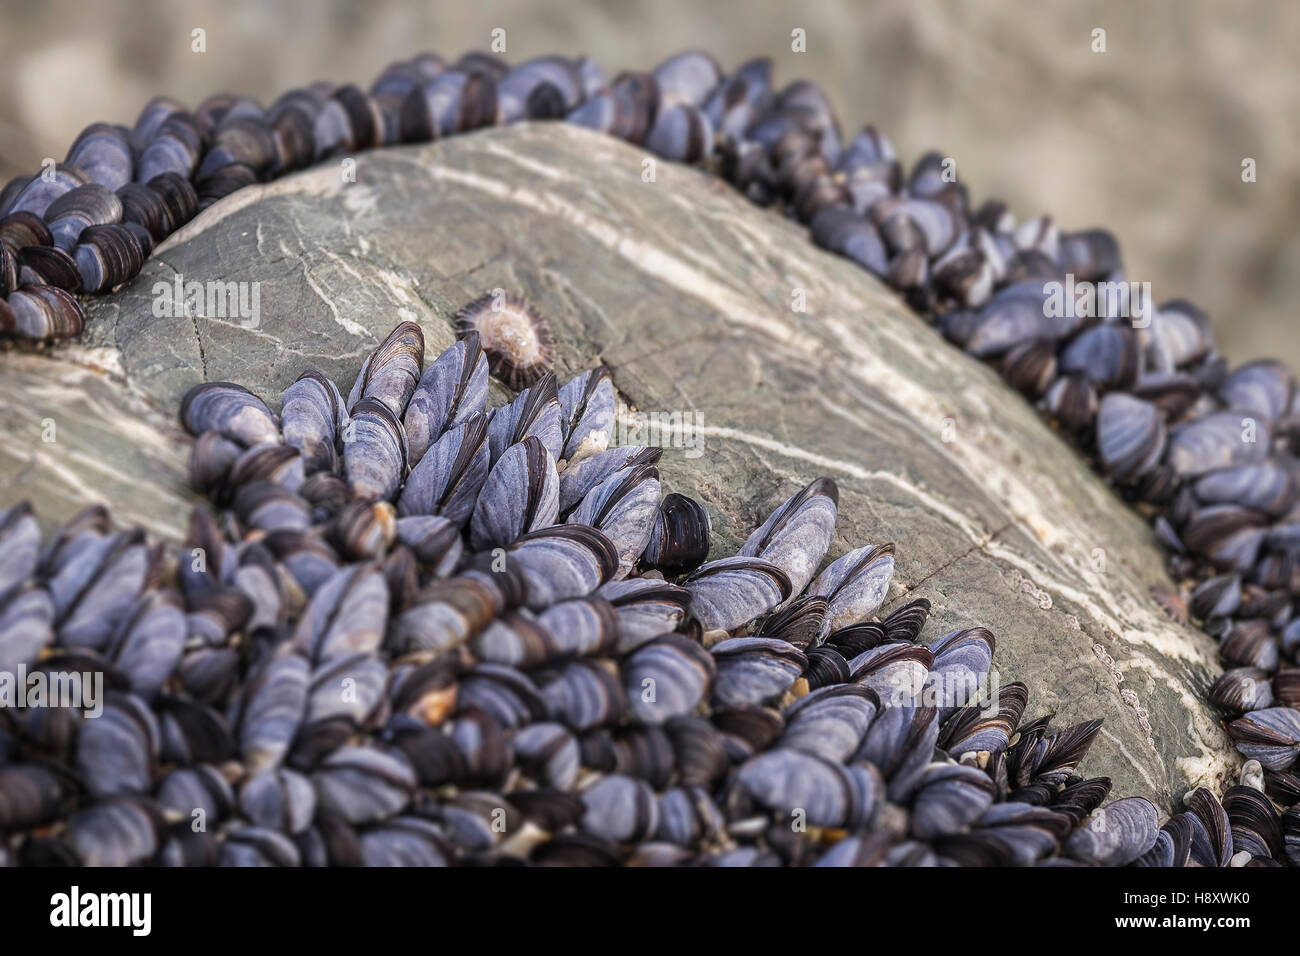 A bed of common mussels. Mytilus edulis. Stock Photo